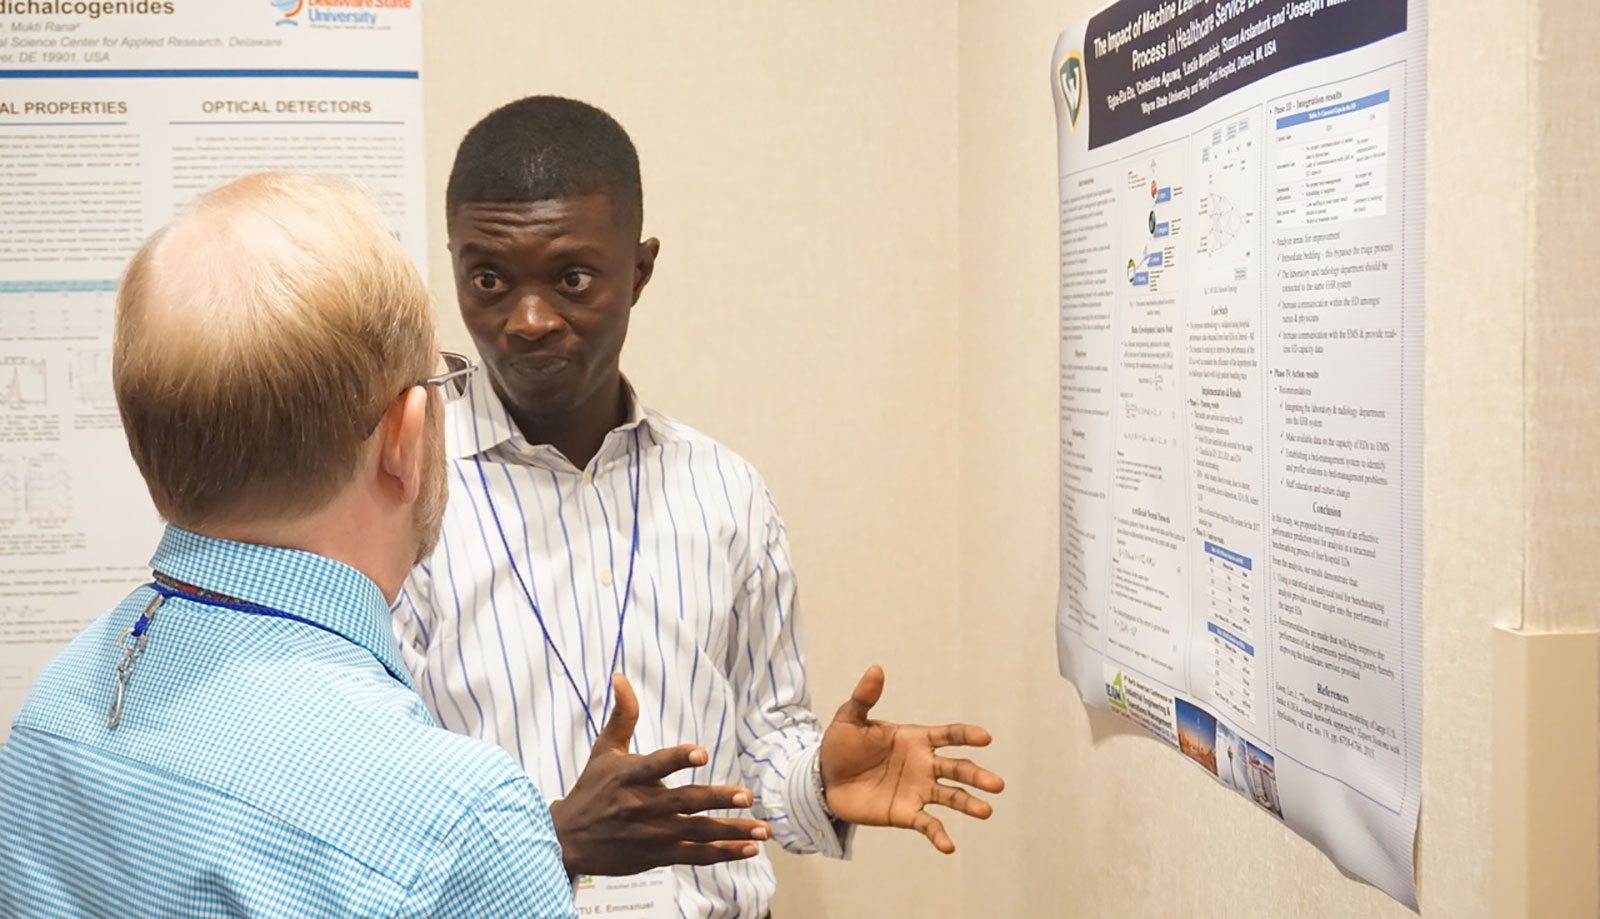 Egbe-Etu Emmanuel Etu, a Ph.D. candidate in the Department of Industrial and Systems Engineering at Wayne State University, presented at the IEOM conference in Toronto.